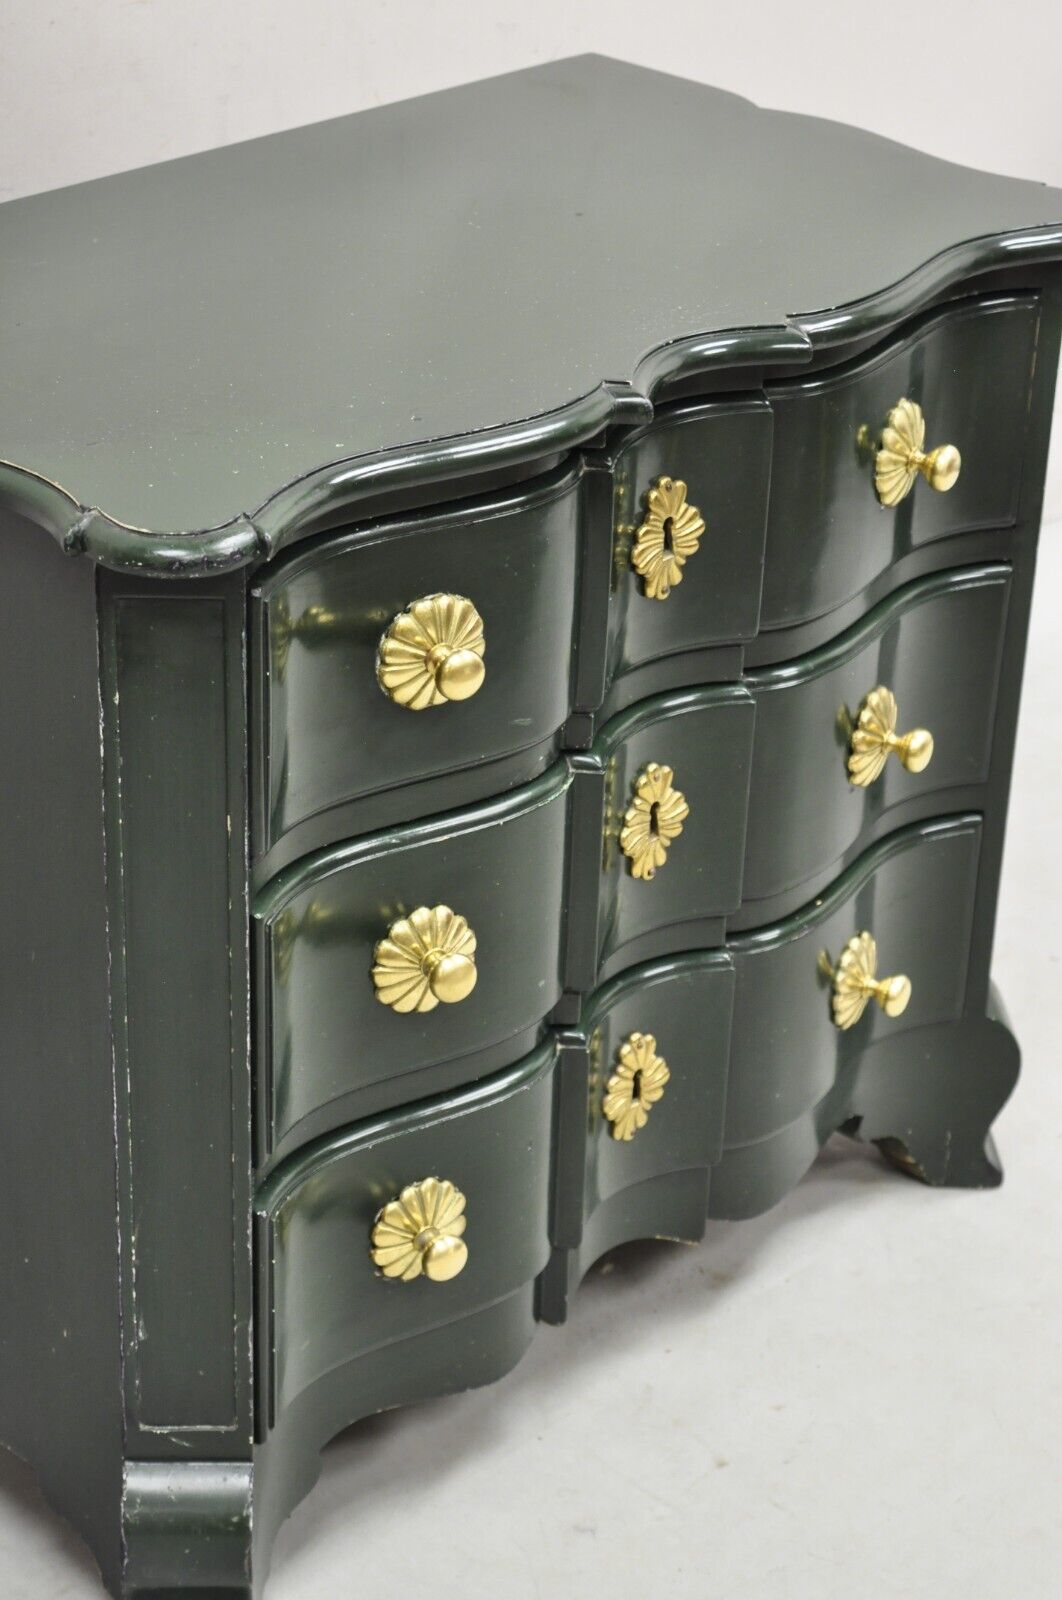 Vintage French Provincial Style Green Lacquer 3 Drawer Nightstand by Roundtree